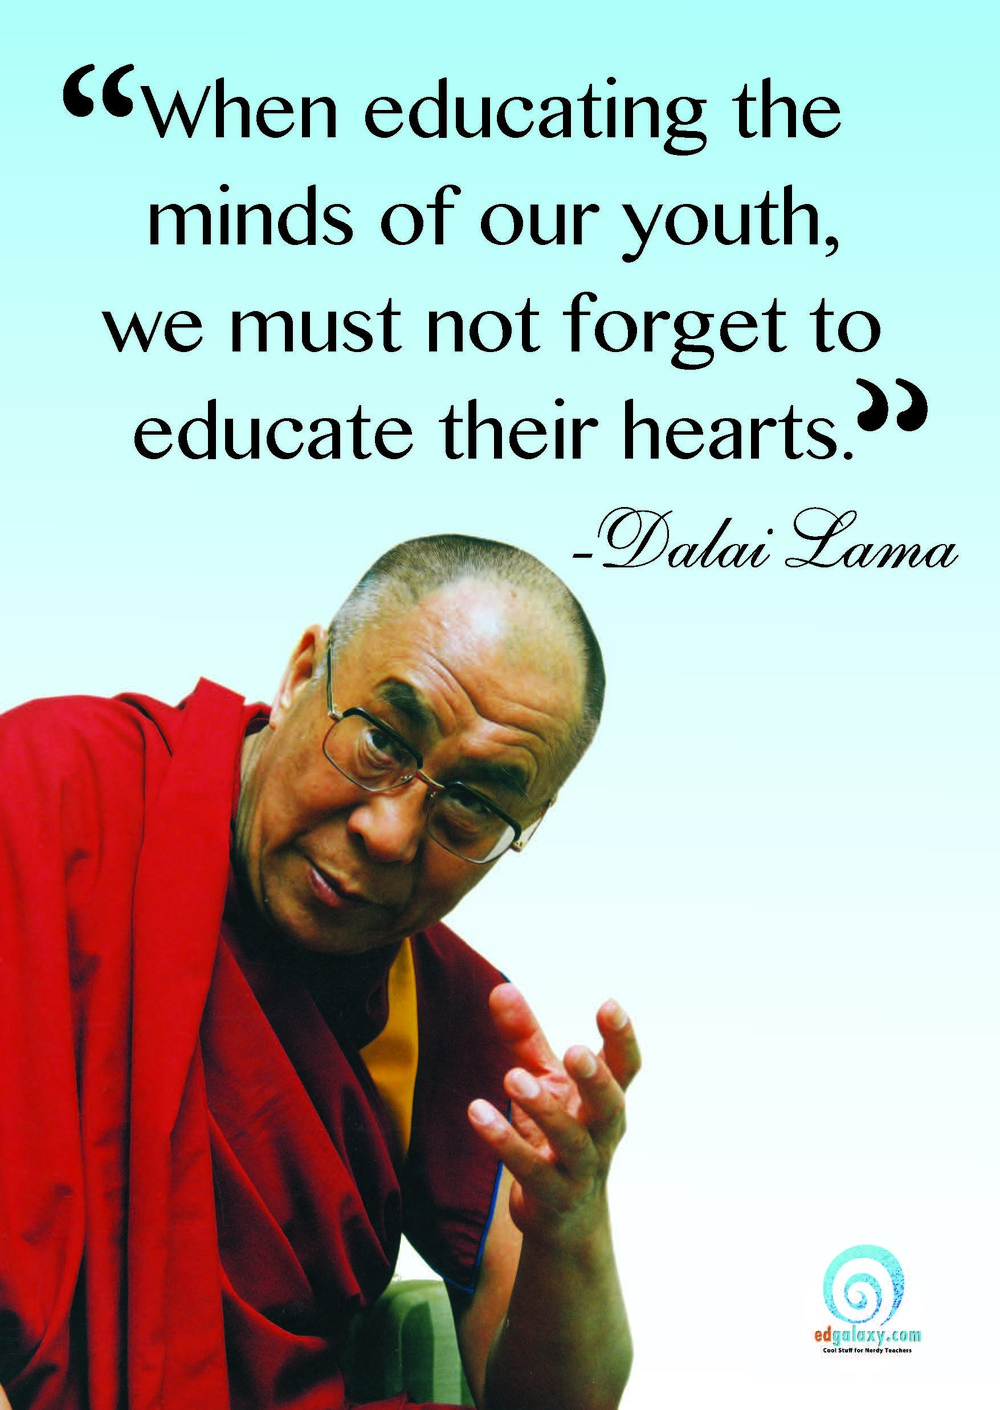 When educating the minds of our youth, we must not forget to educate their hearts. Dalai Lama